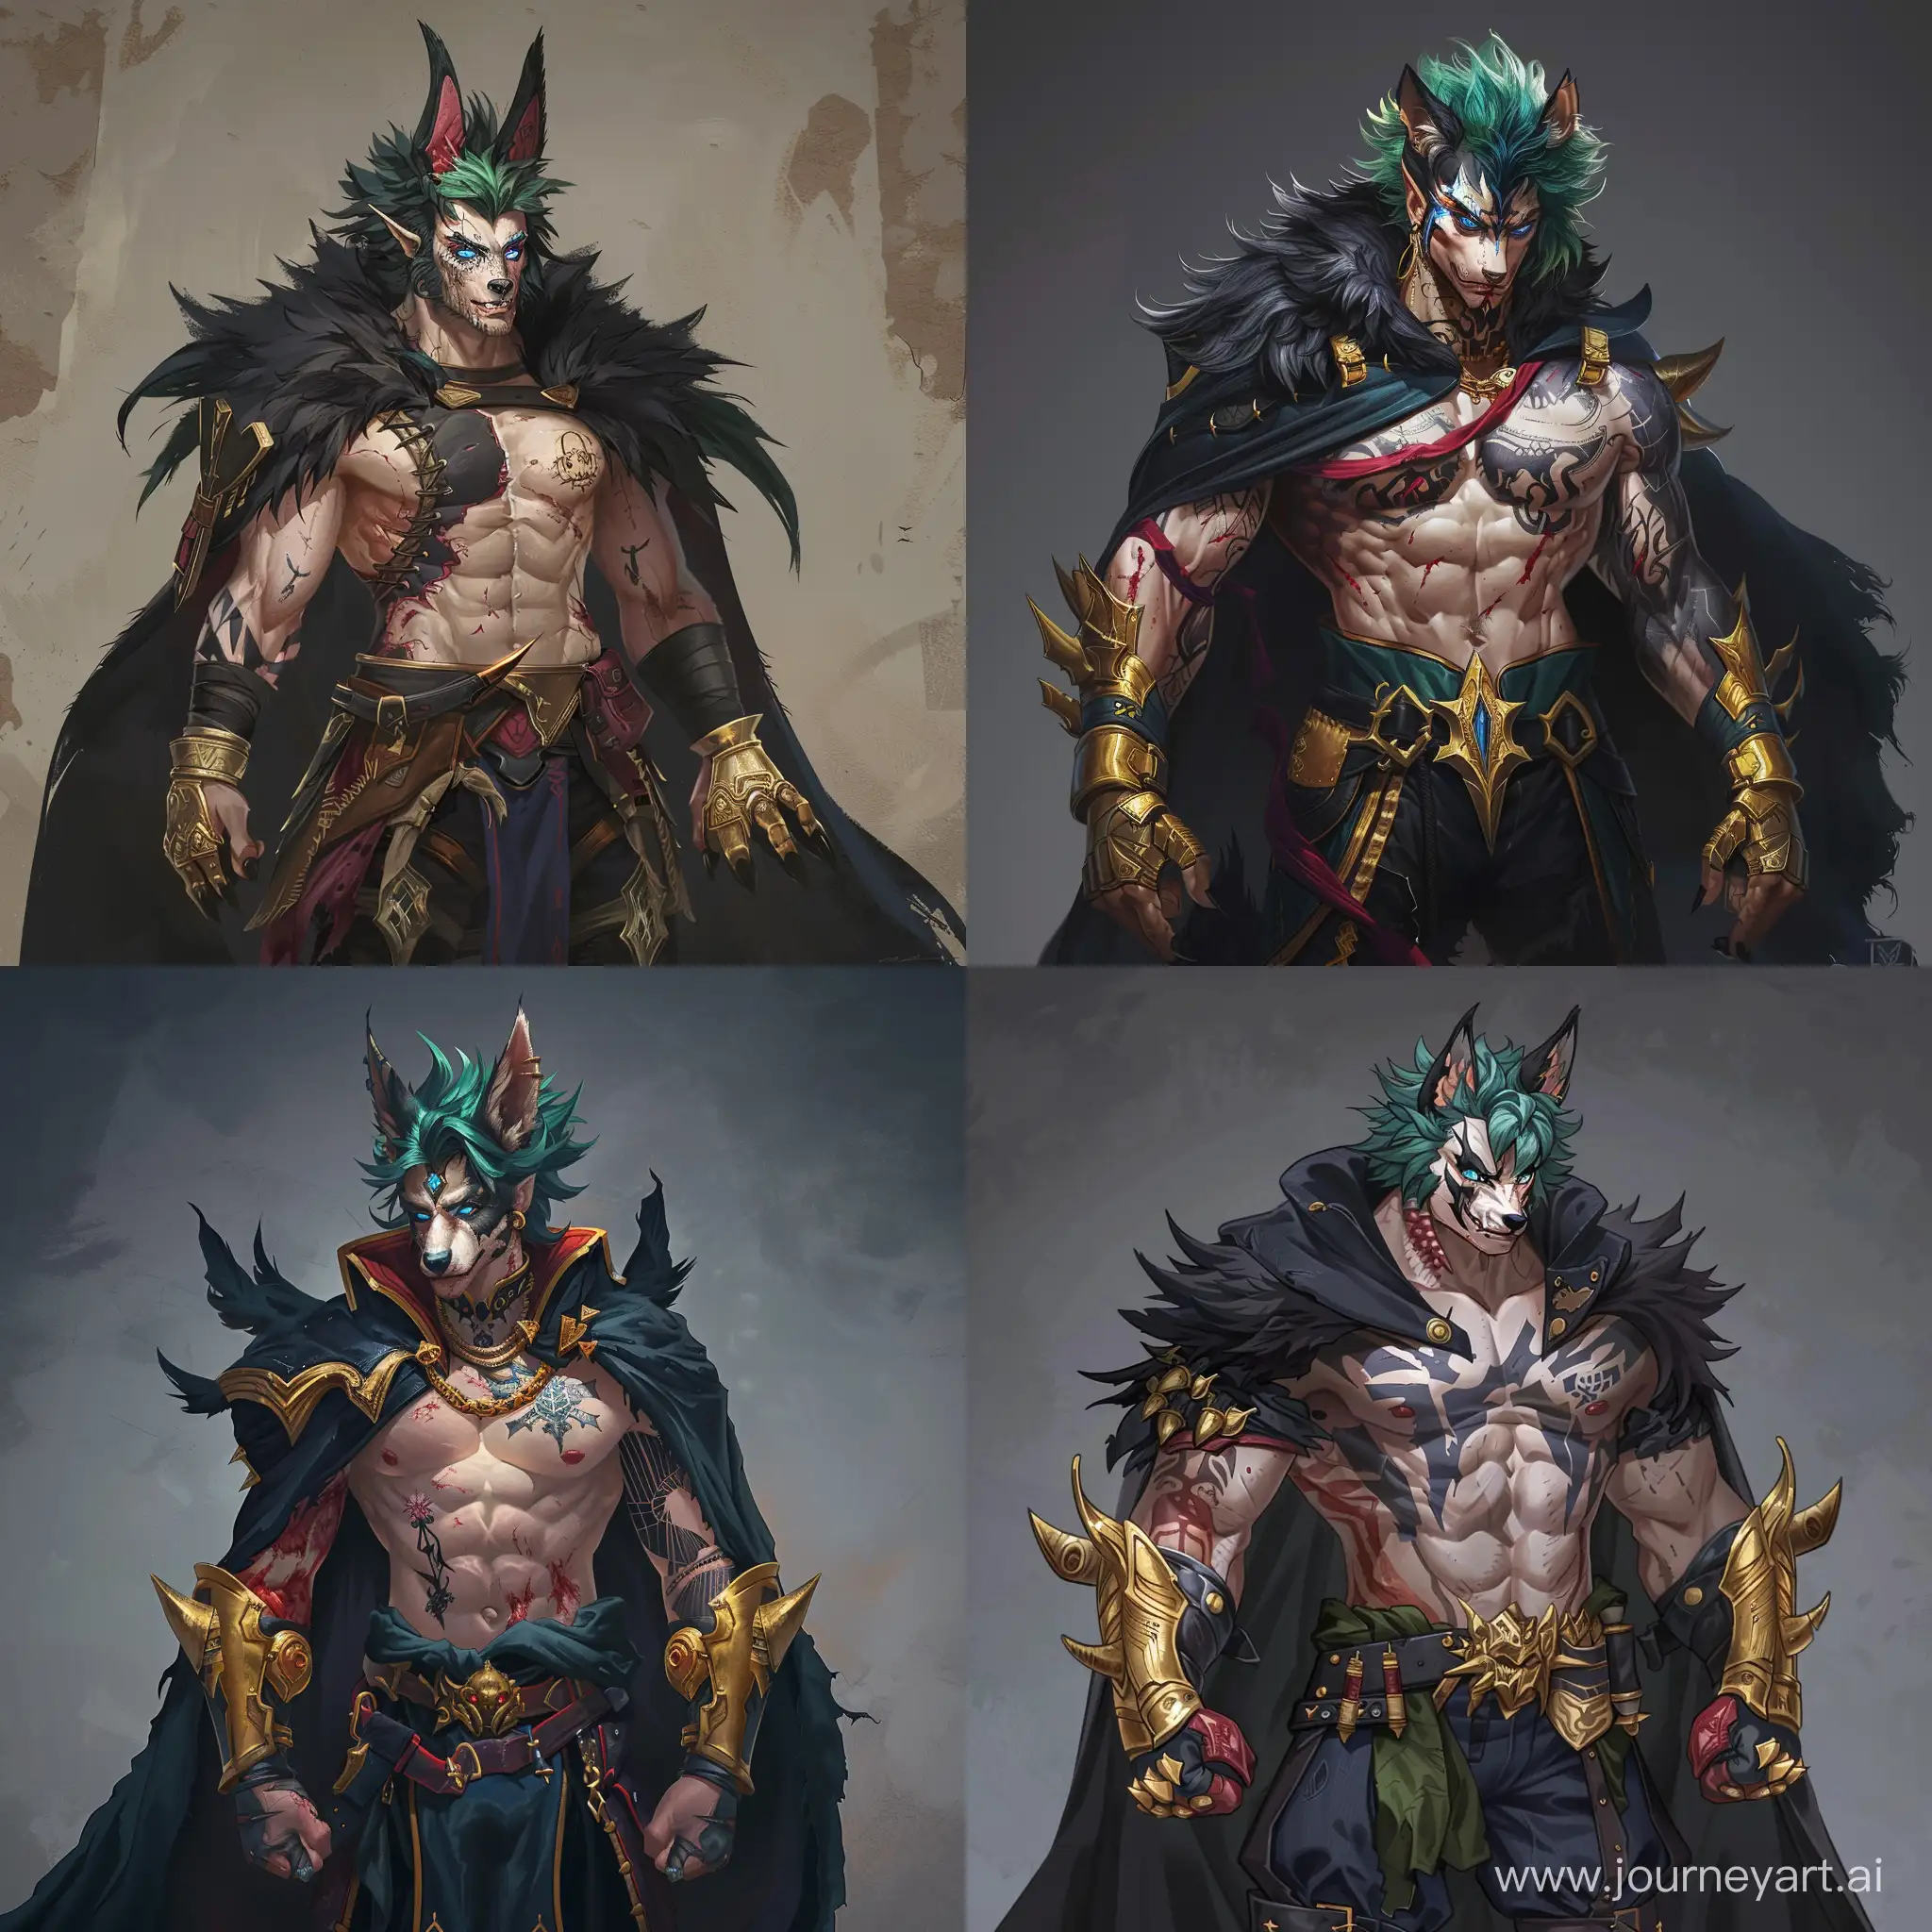 A beefy, handsome and pale half-man with the ears and tail of a black wolf. Green hair, bright blue eyes and beautiful combat clothes. He has a huge scar on his chest, and his whole face is scarred. The whole body is covered in black and red tattoos. He uses gold gauntlets as weapons. He wears a black cape on top to hide his military attire.